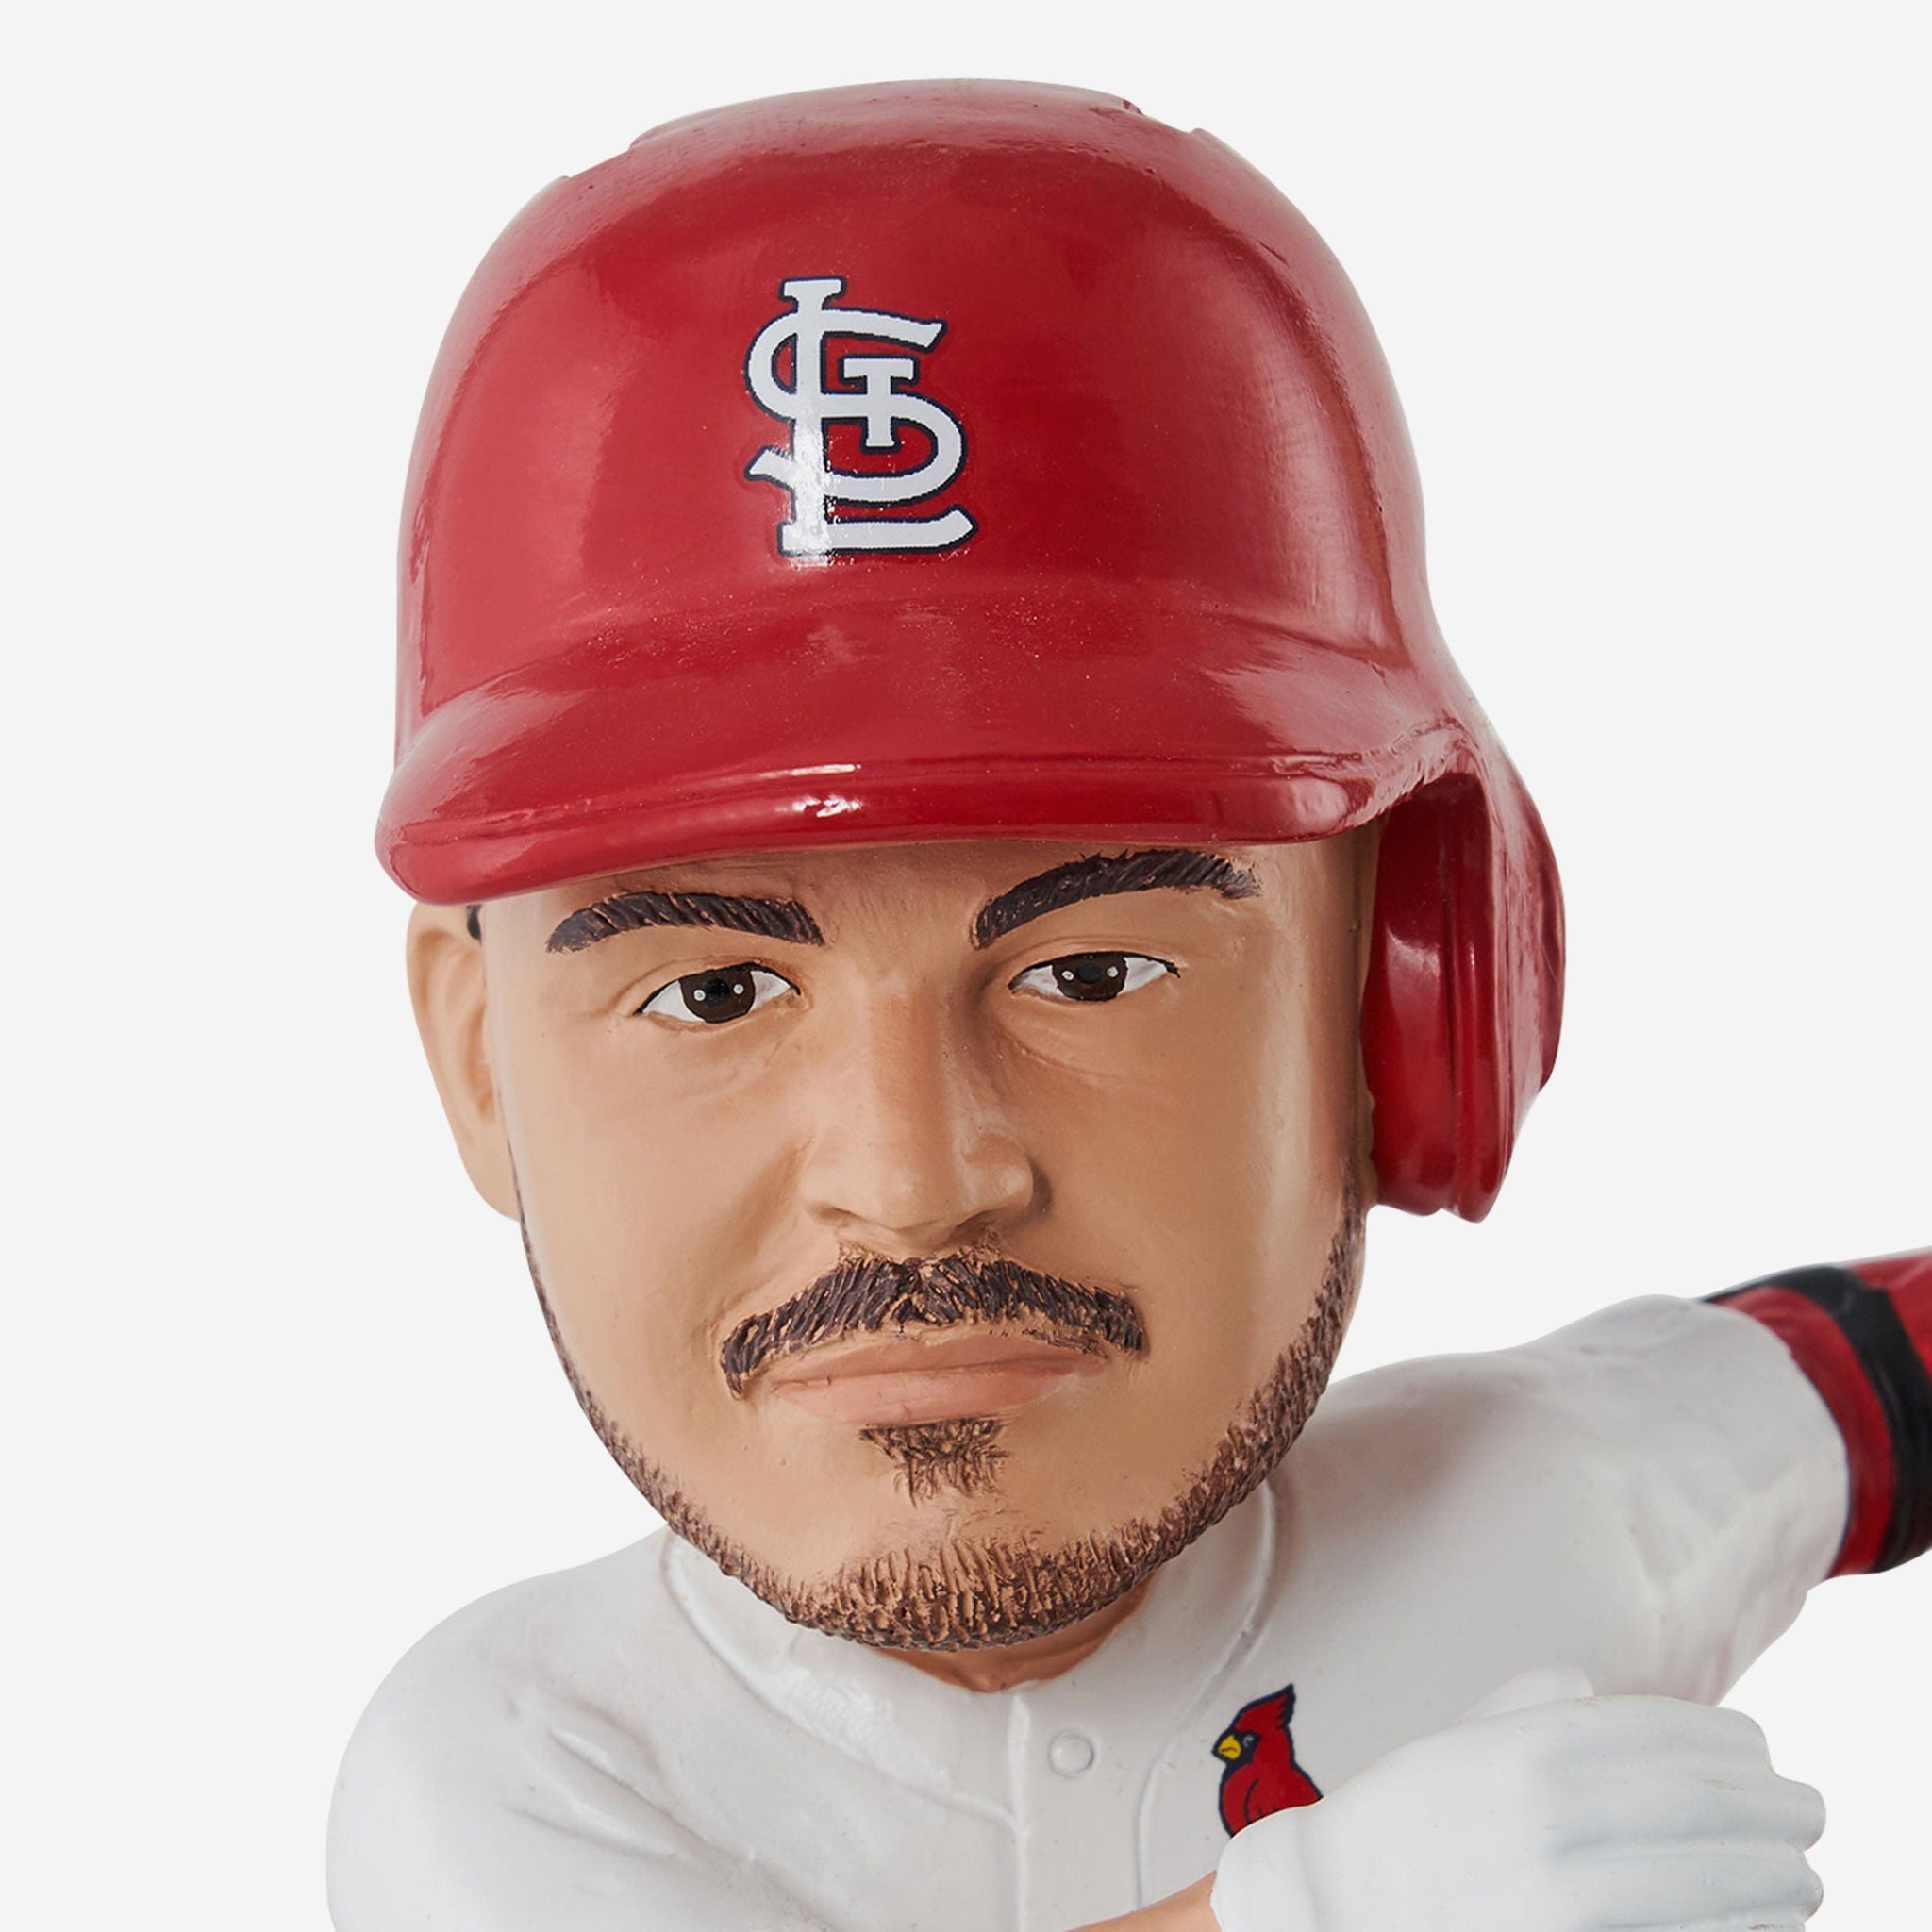 How do the Cardinals decide on their bobblehead giveaways?